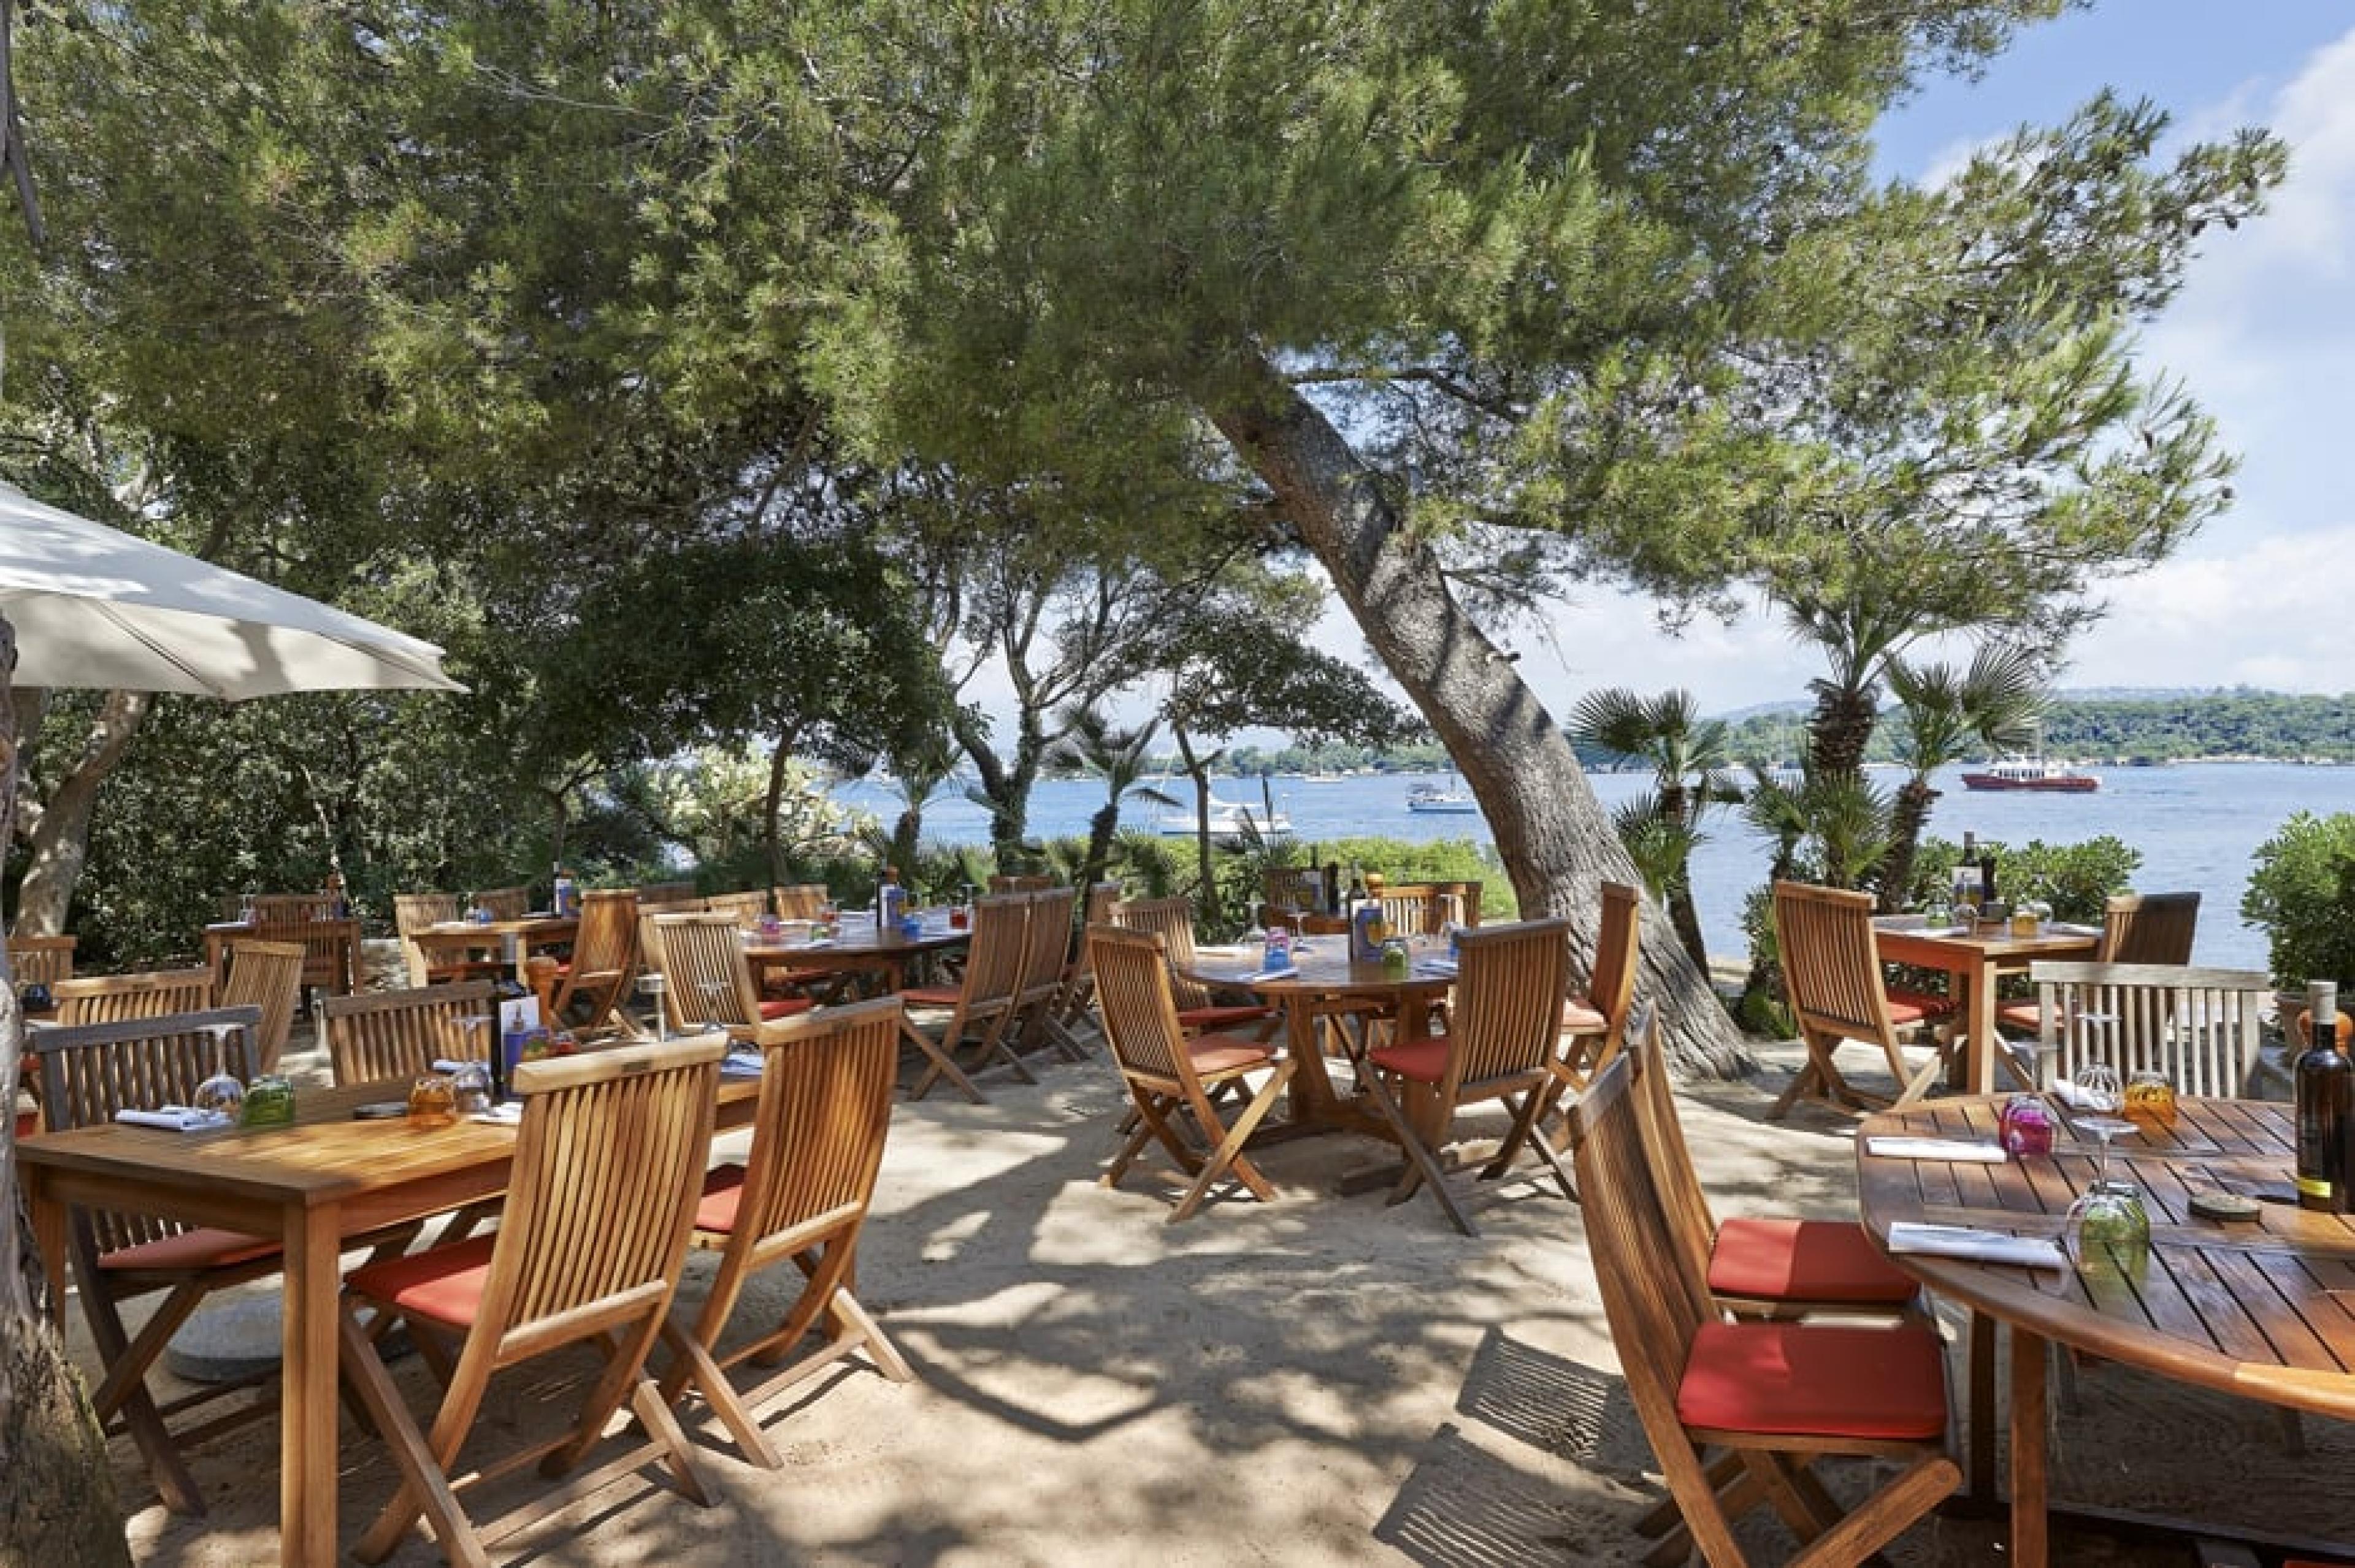 Dinning Area at La Tonnelle, French Riviera, France - Courtesy Lerins Abbey